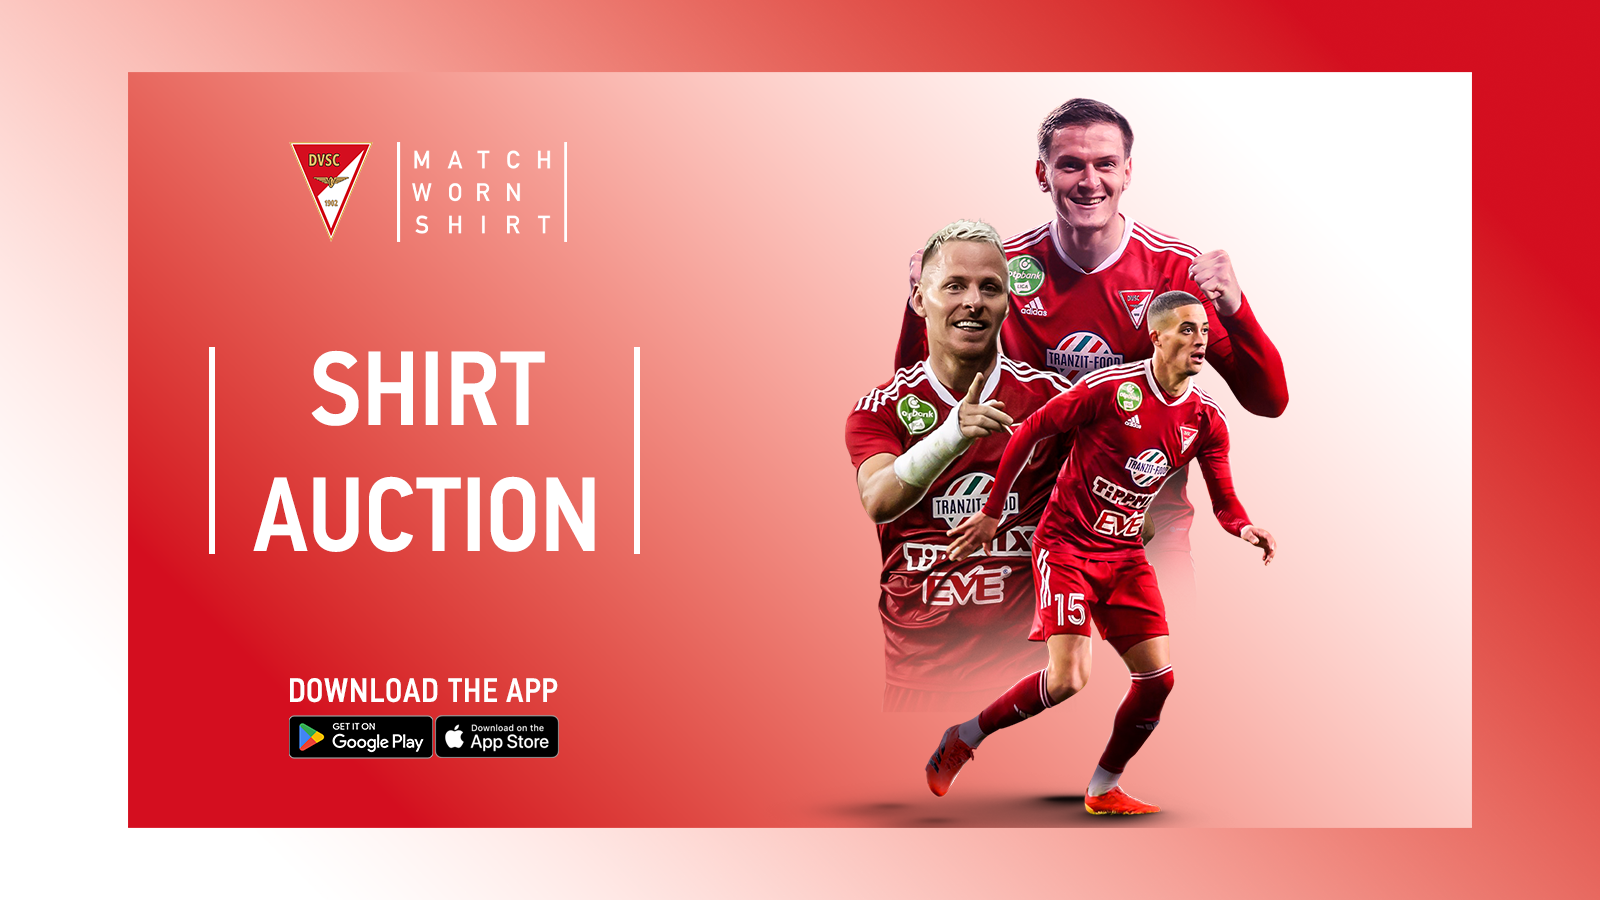 Bid on the dedicated shirts of players, worn during the match against